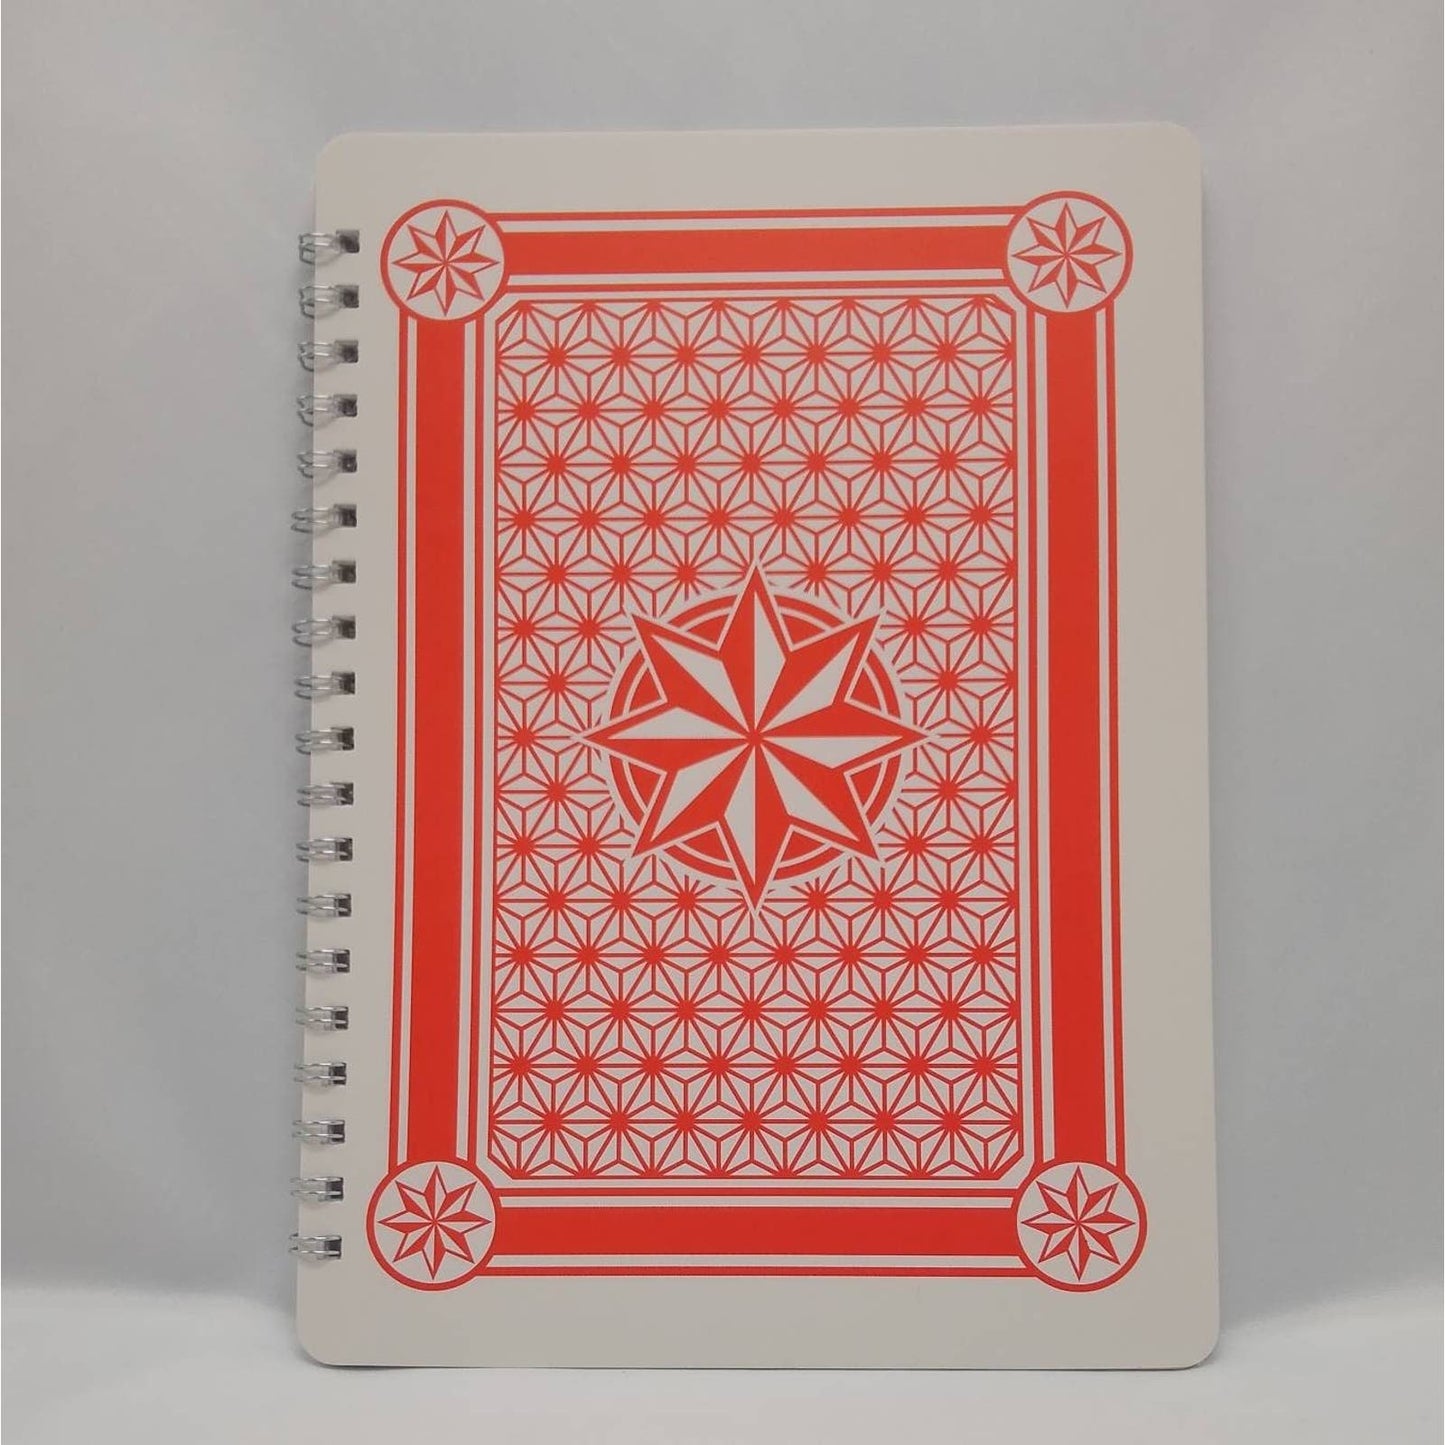 Giant Playing Card Spiral Bound Journal, Altered Book, Junk Journal, Blank Book Journal,